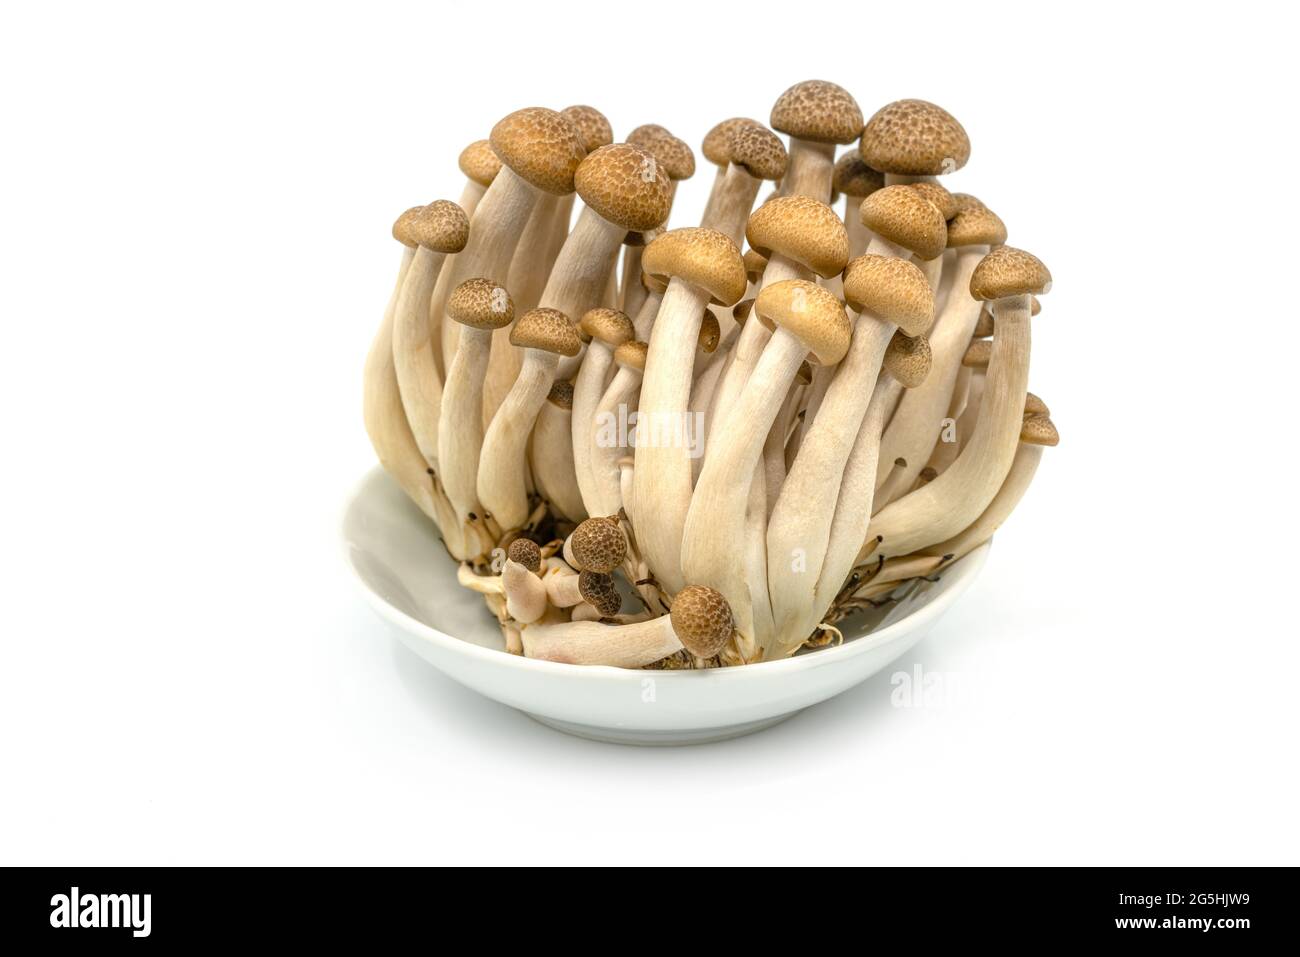 Close up Bunch of brown beech mushrooms or Shimeji mushroom or Bunna-shimeji in white small plate on white background. Stock Photo